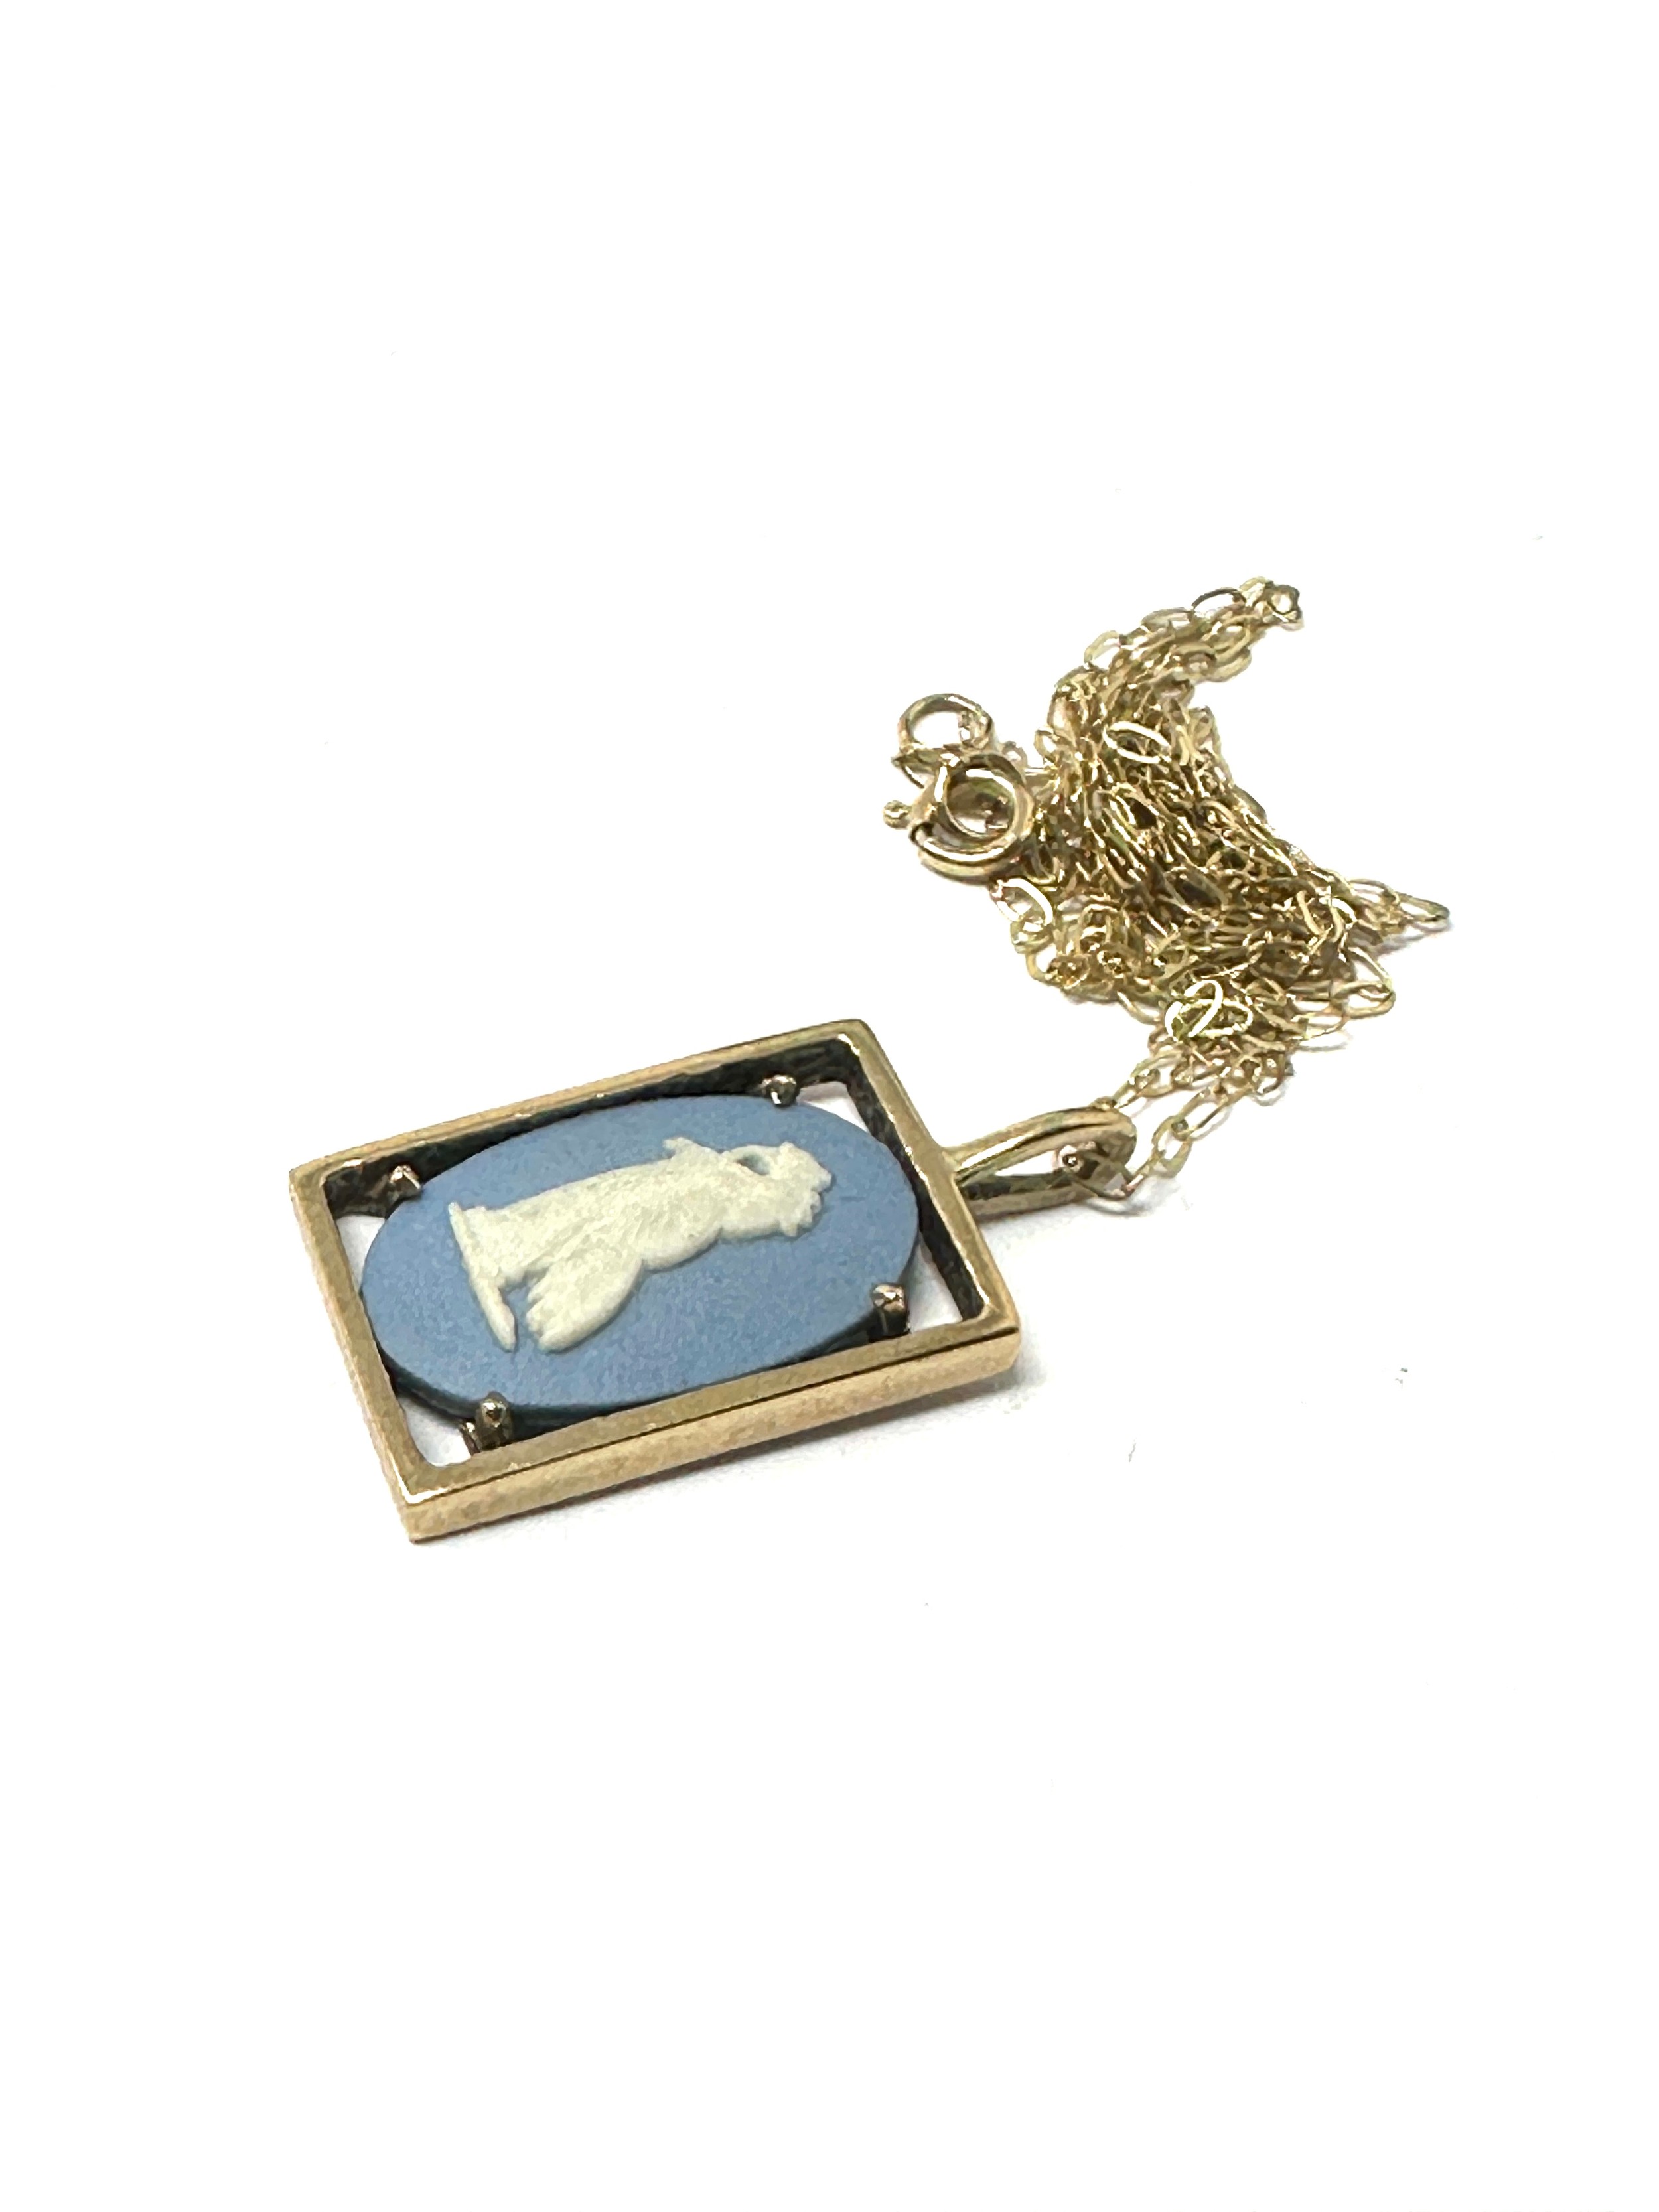 9ct Gold Jasperware Pendant Necklace By Wedgwood (2.1g) - Image 2 of 3